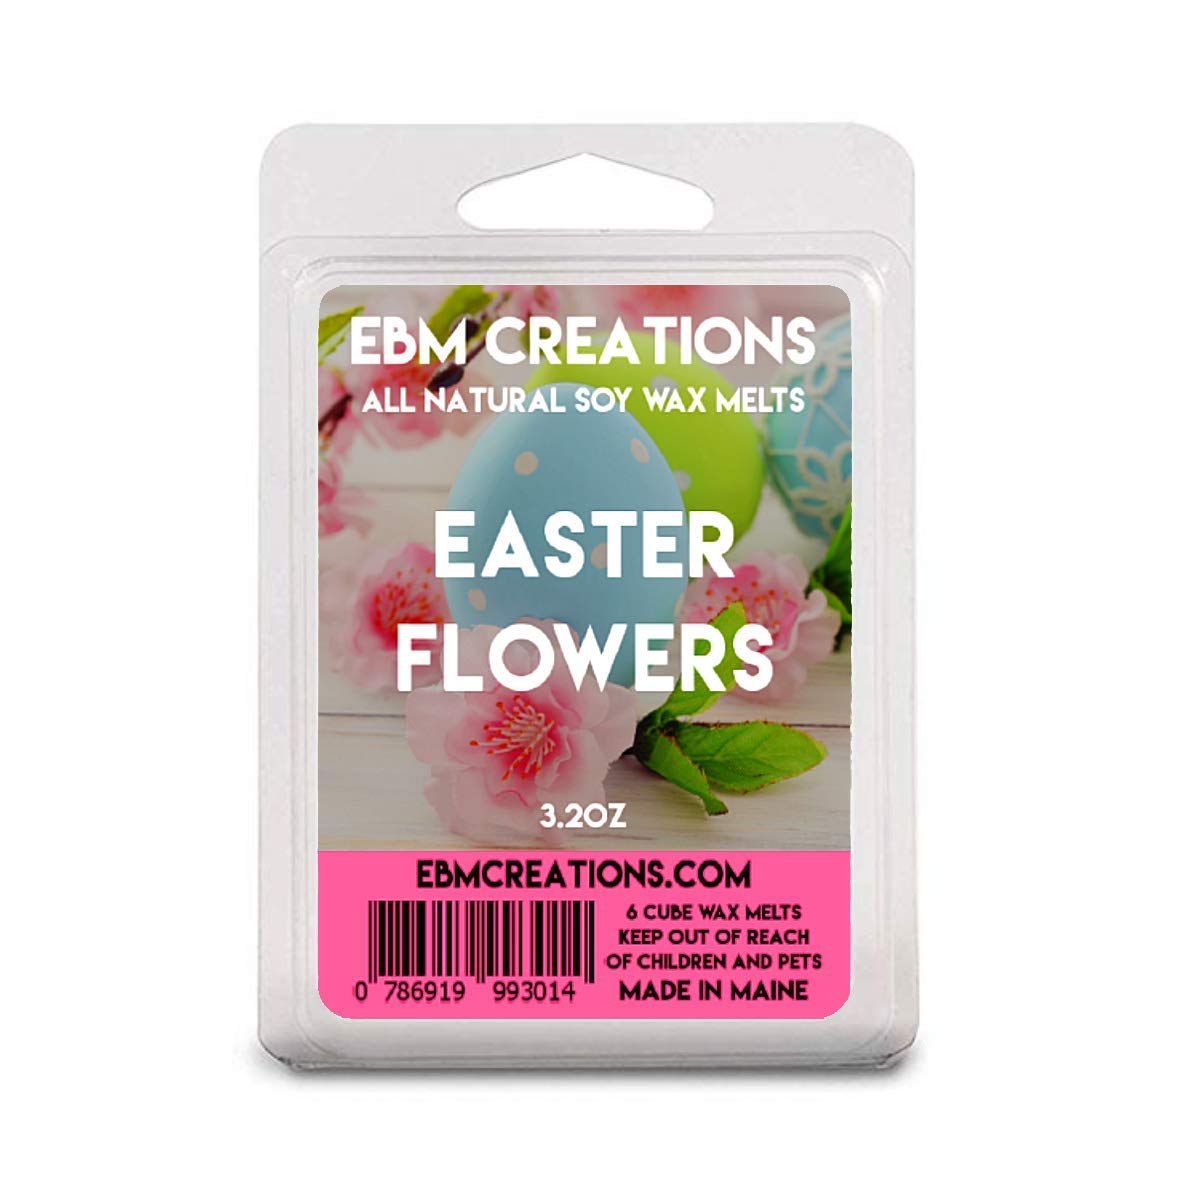 Easter Flowers - 3.2 oz Clamshell